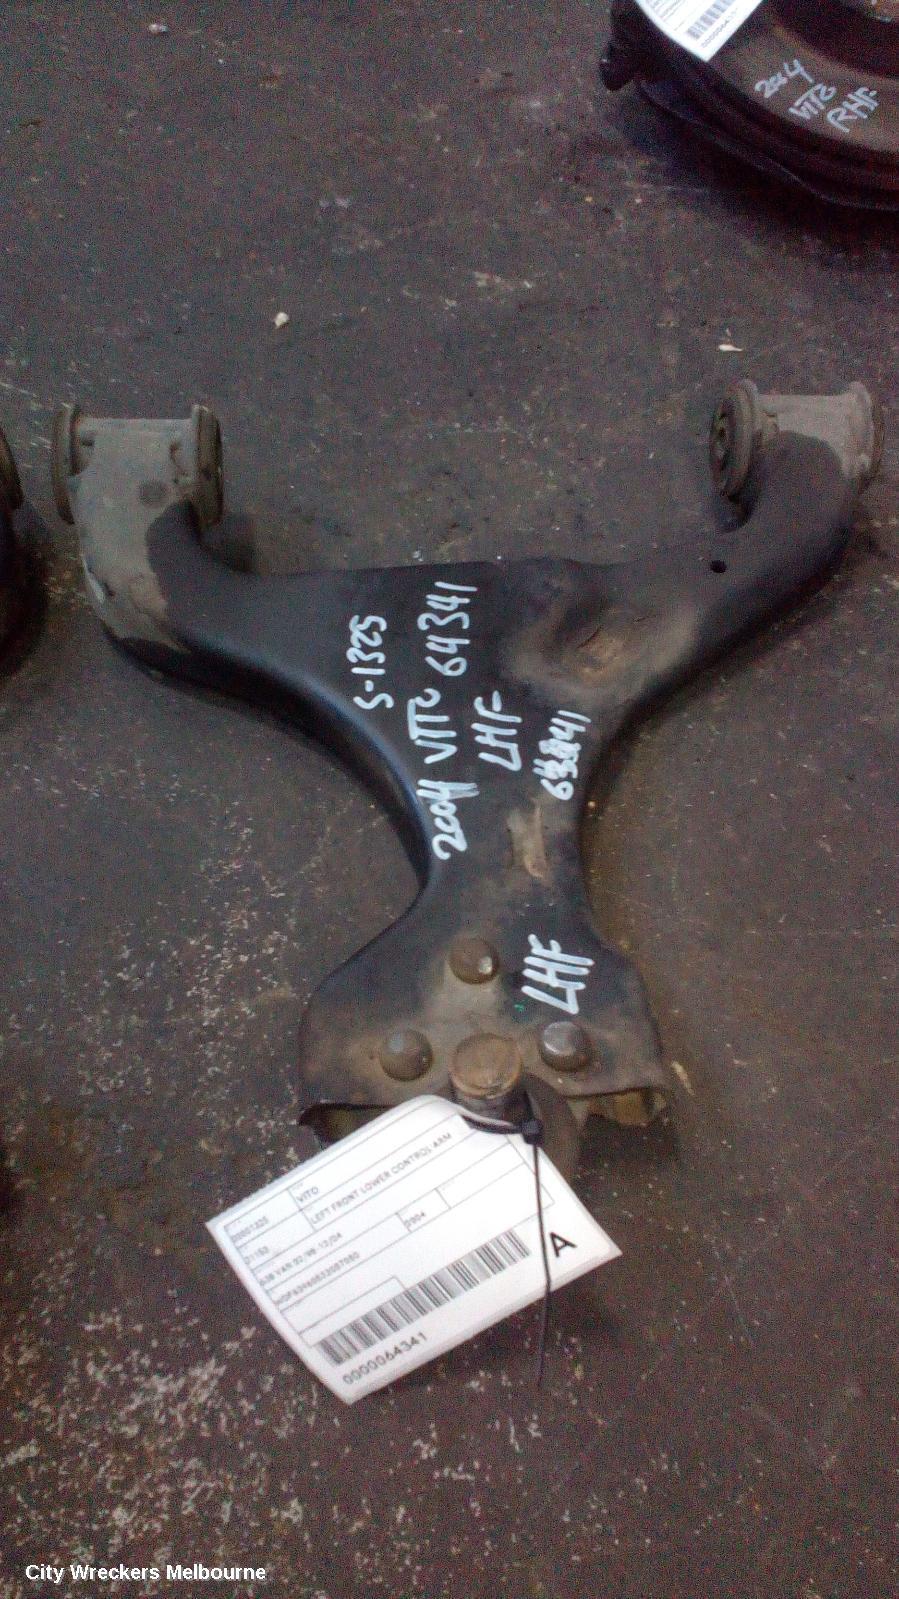 MERCEDES VITO 2004 Left Front Lower Control Arm